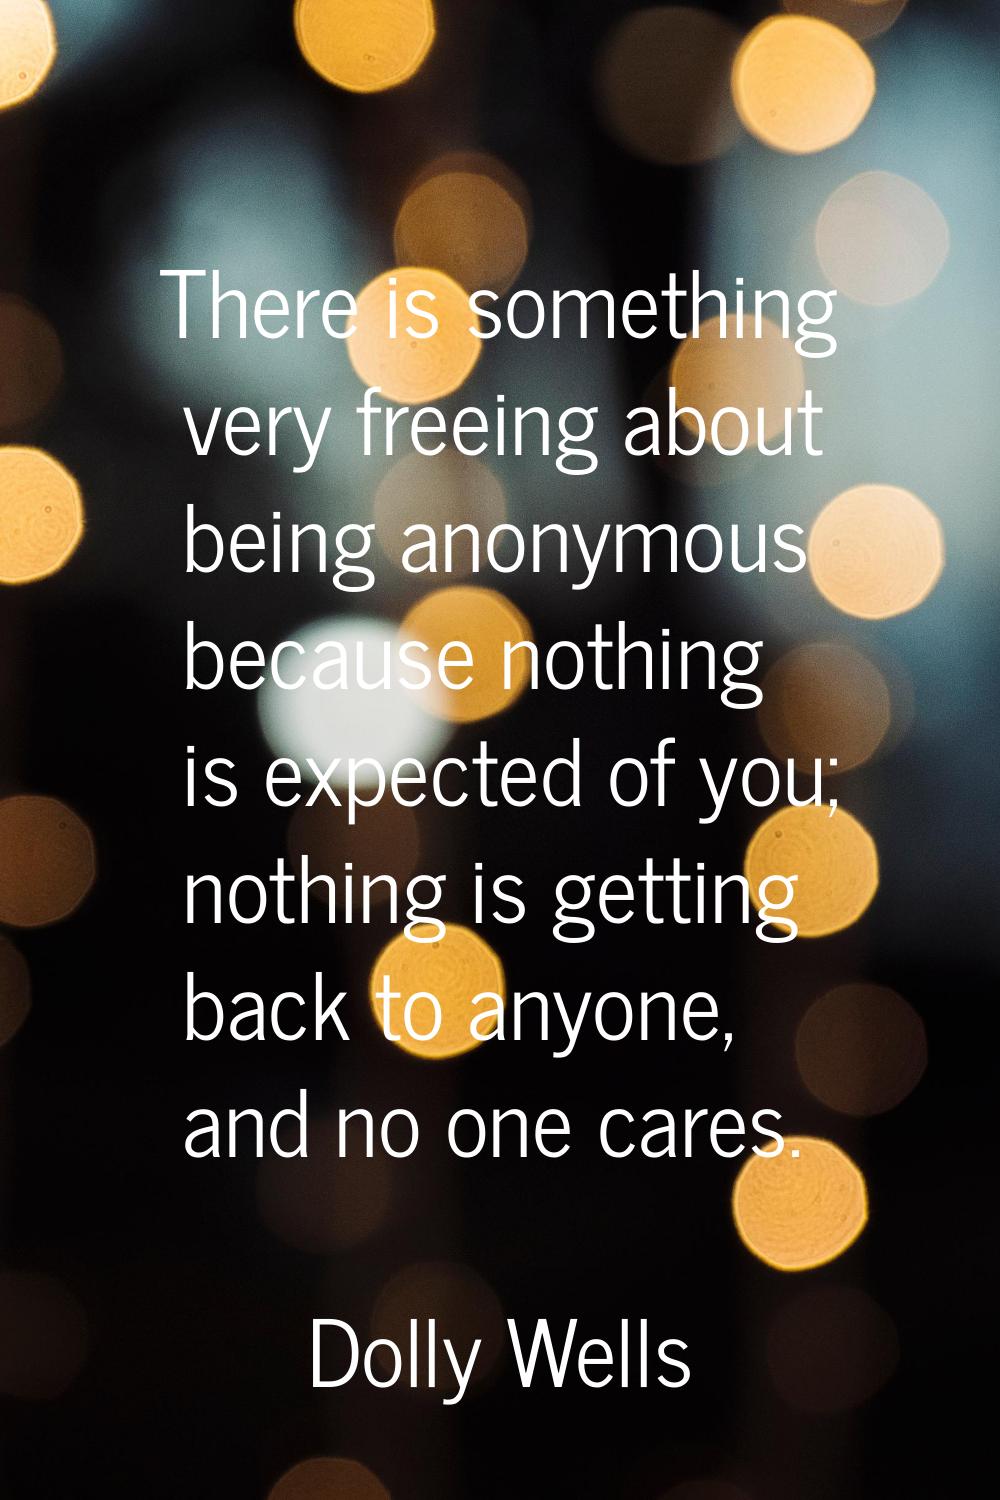 There is something very freeing about being anonymous because nothing is expected of you; nothing i